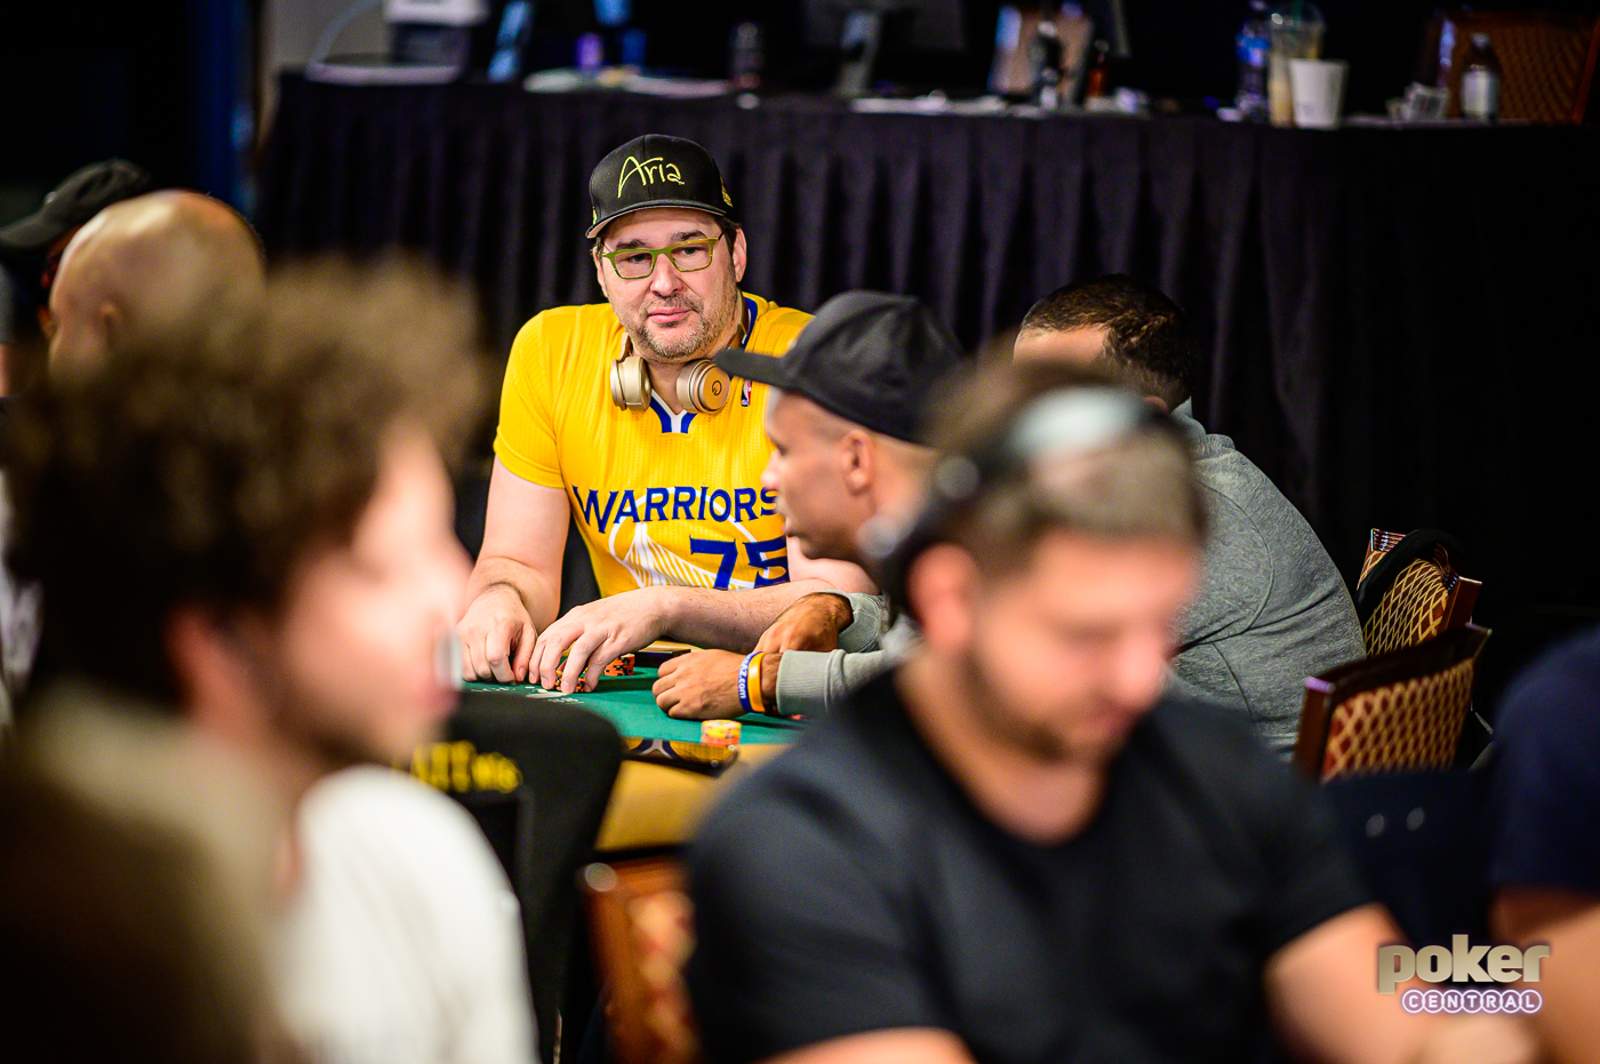 Phil Hellmuth and Brian Rast Want More, Dan Zack Winning the WSOP POY Race